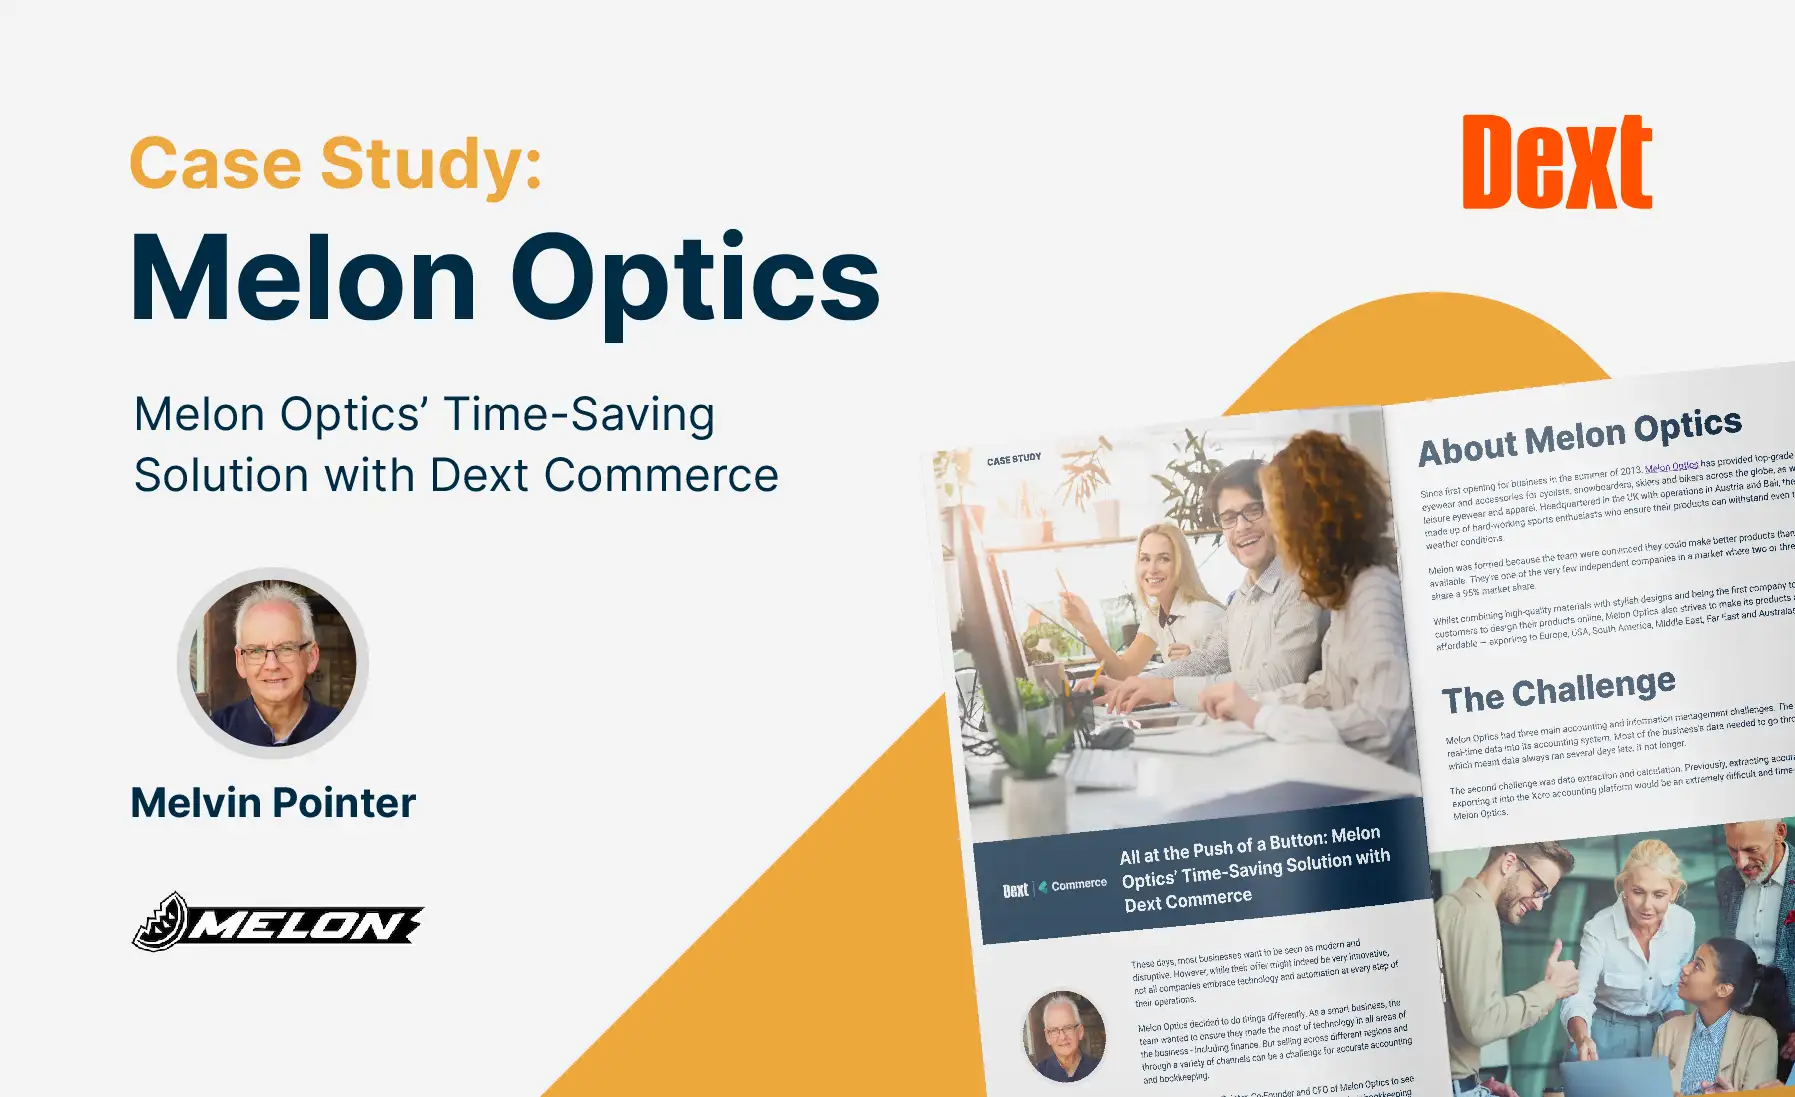 All at the Push of a Button: Melon Optics’ Time-Saving Solution with Dext Commerce image